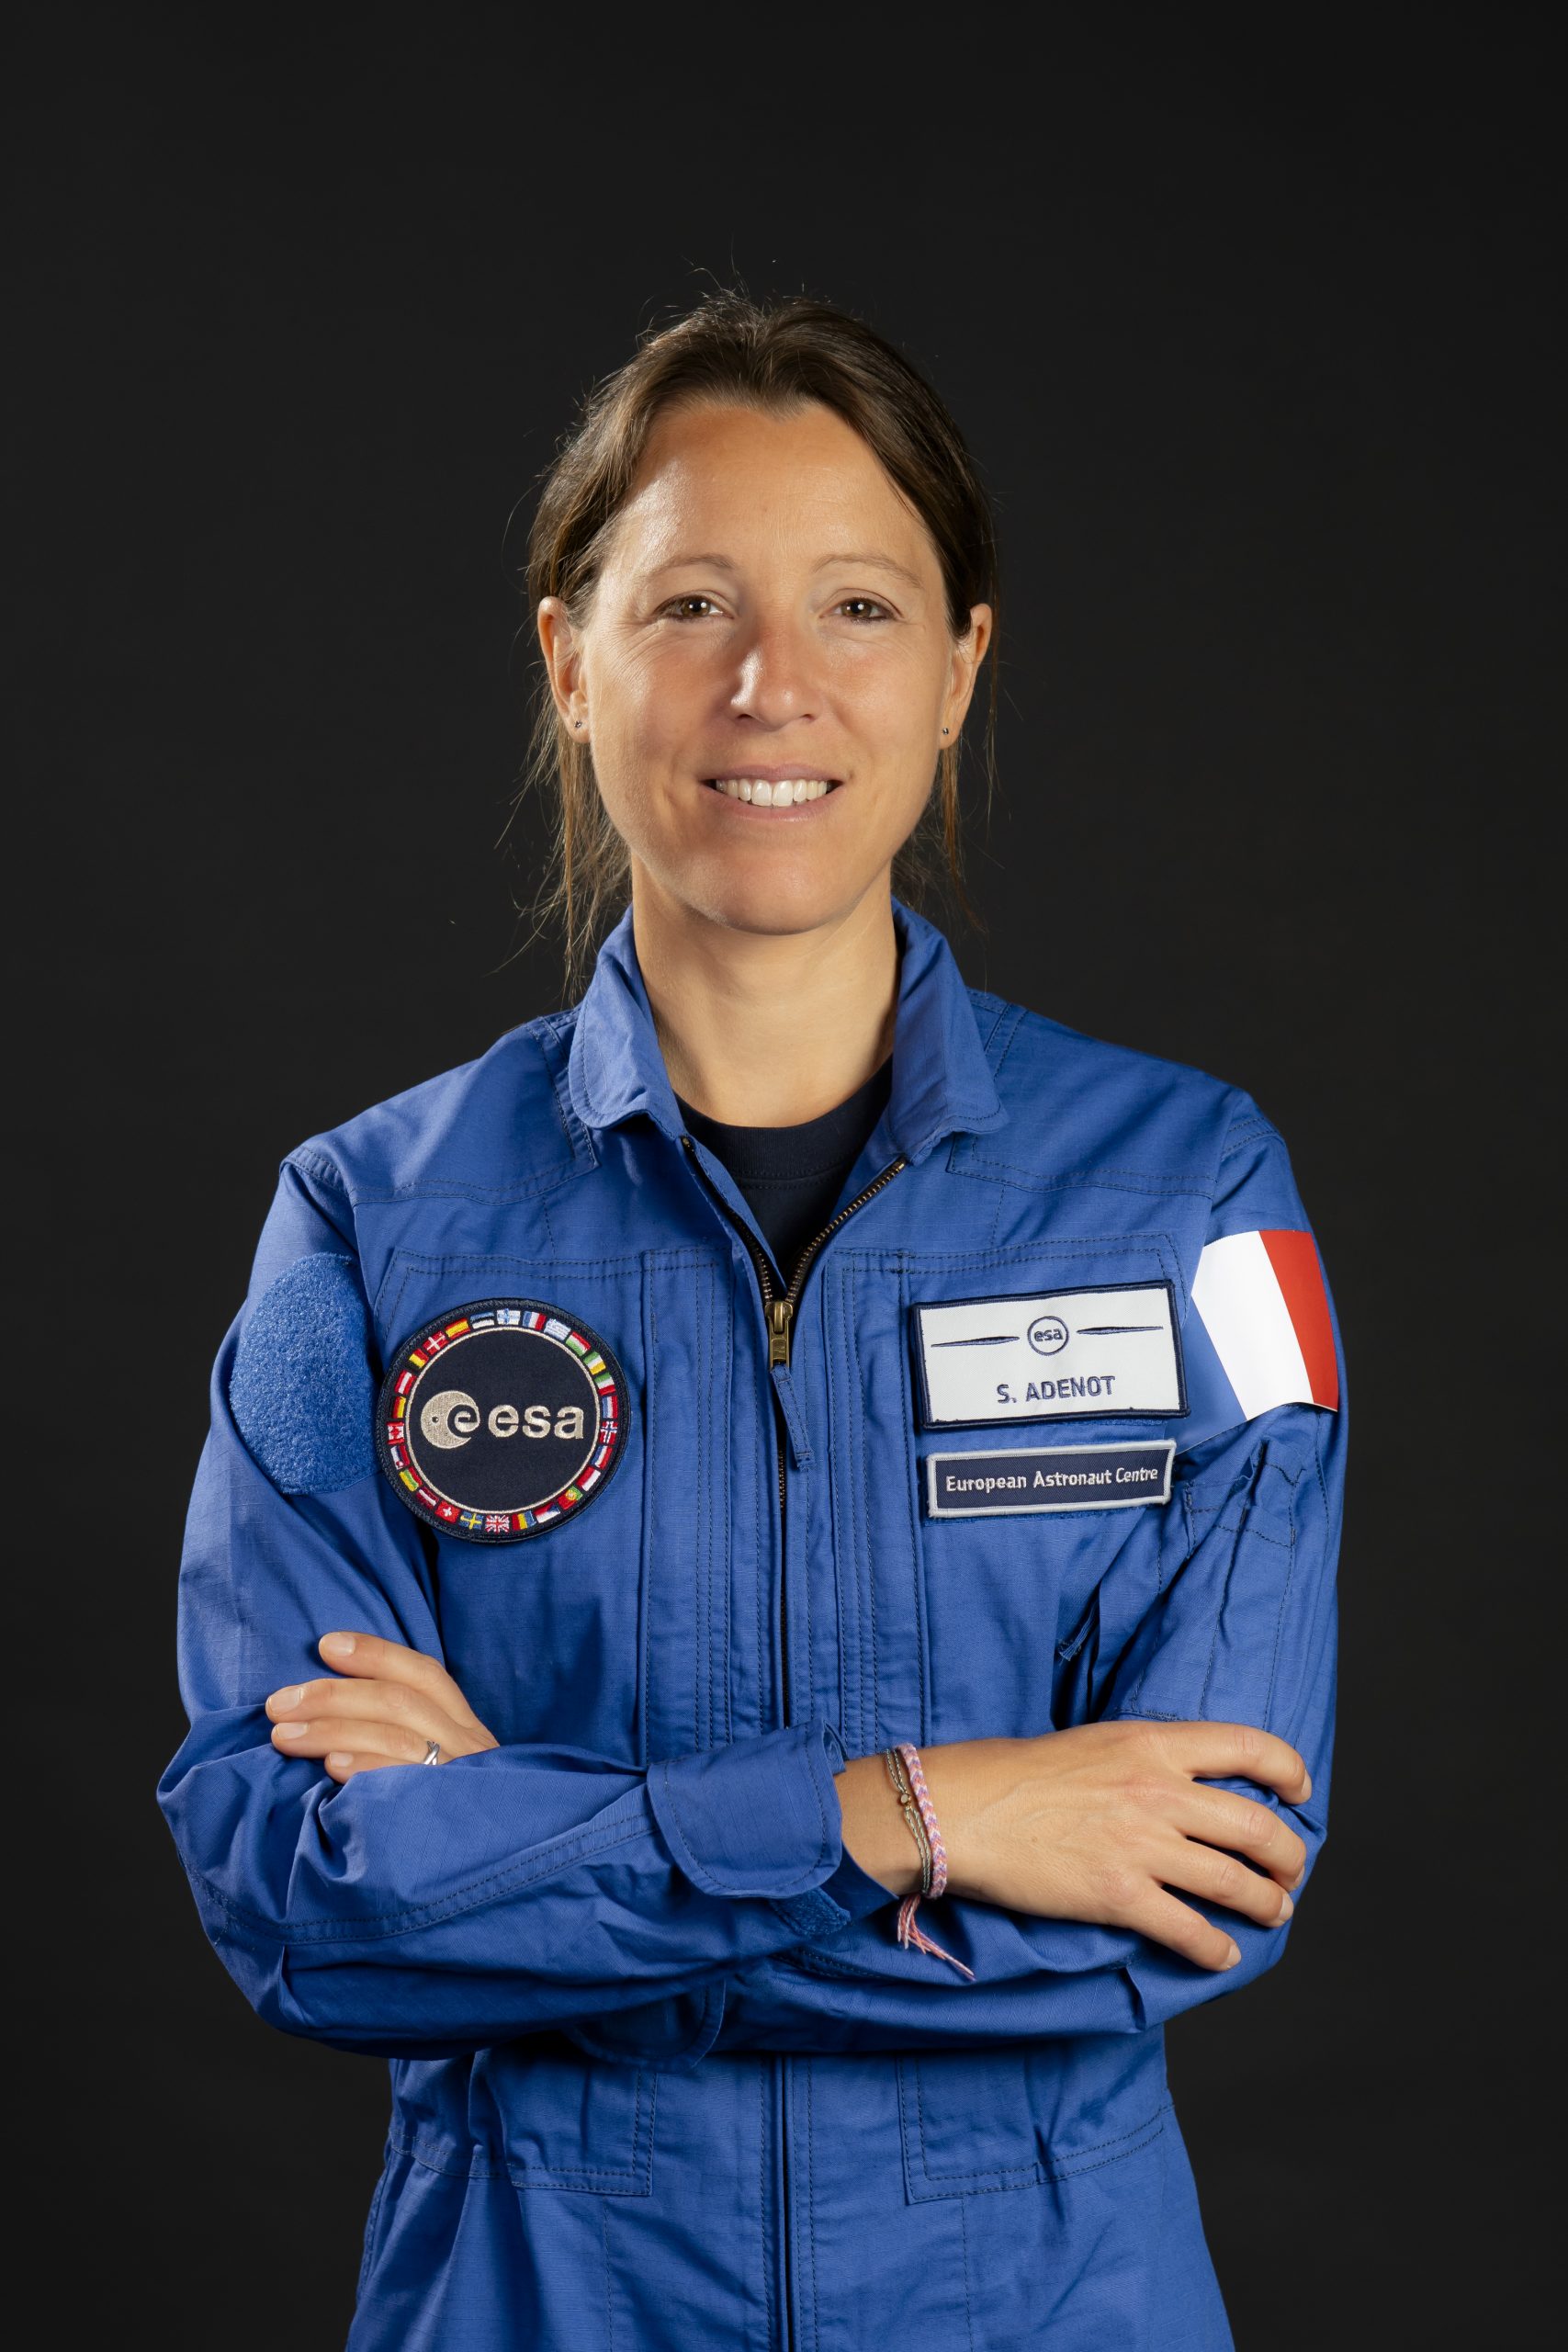 Portrait of ESA astronaut candidate Sophie Adenot from ESA's astronaut class of 2022.